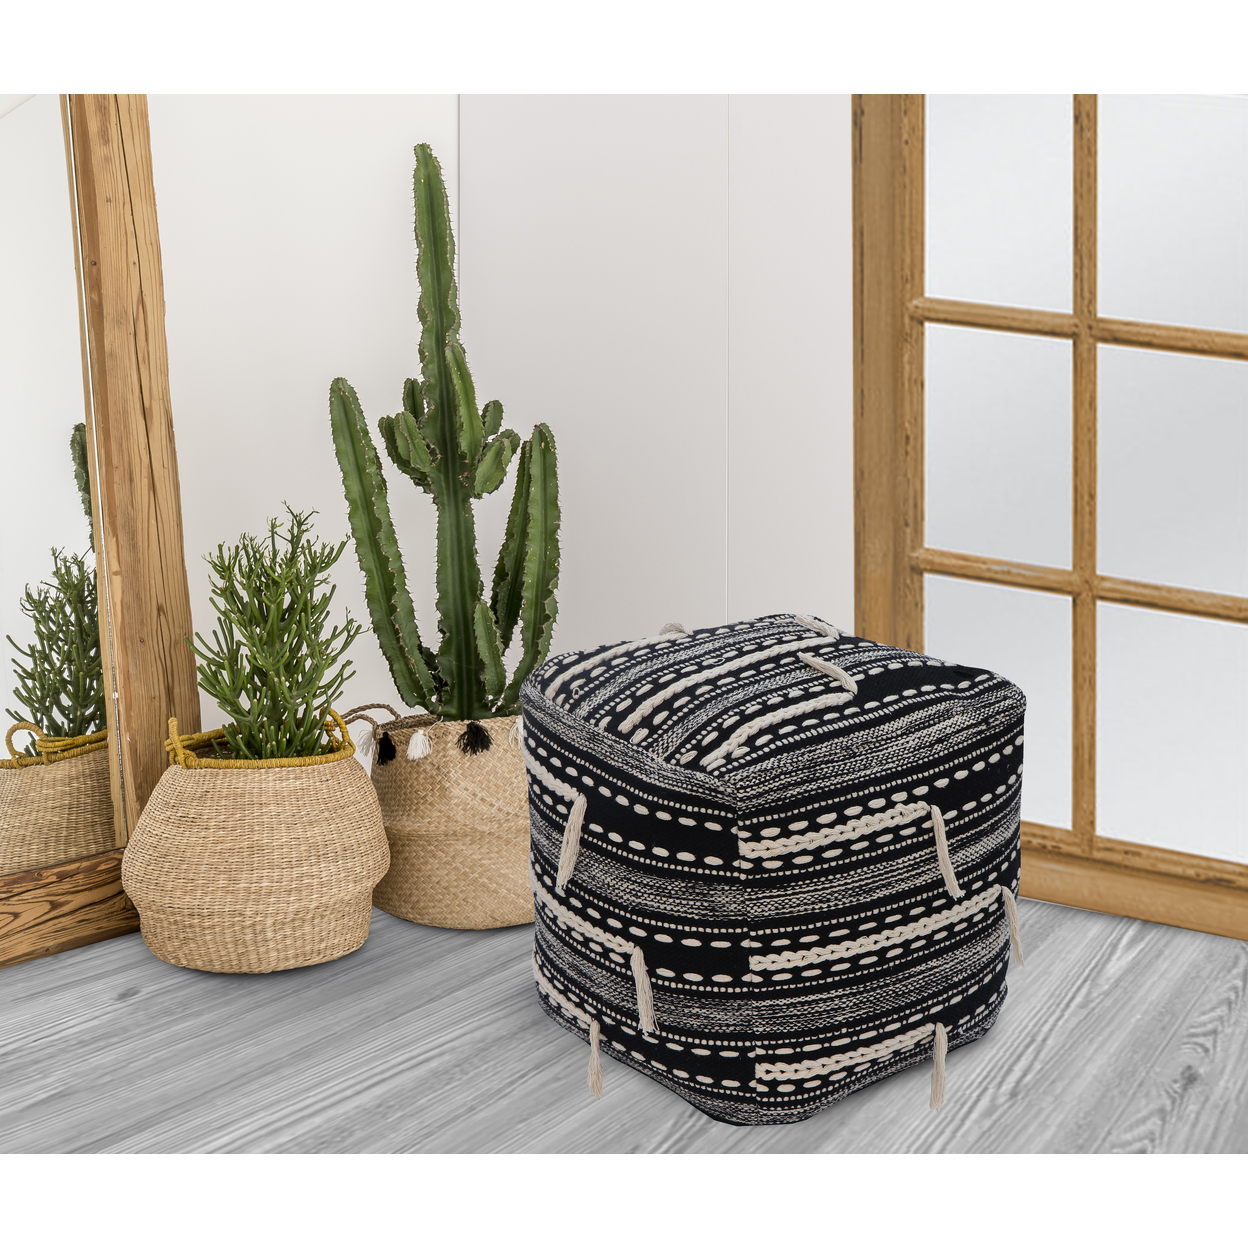 Iconic Home Spearman Ottoman Woven Cotton Upholstered Two-Tone Striped Pattern With Tassels Square Pouf - Black